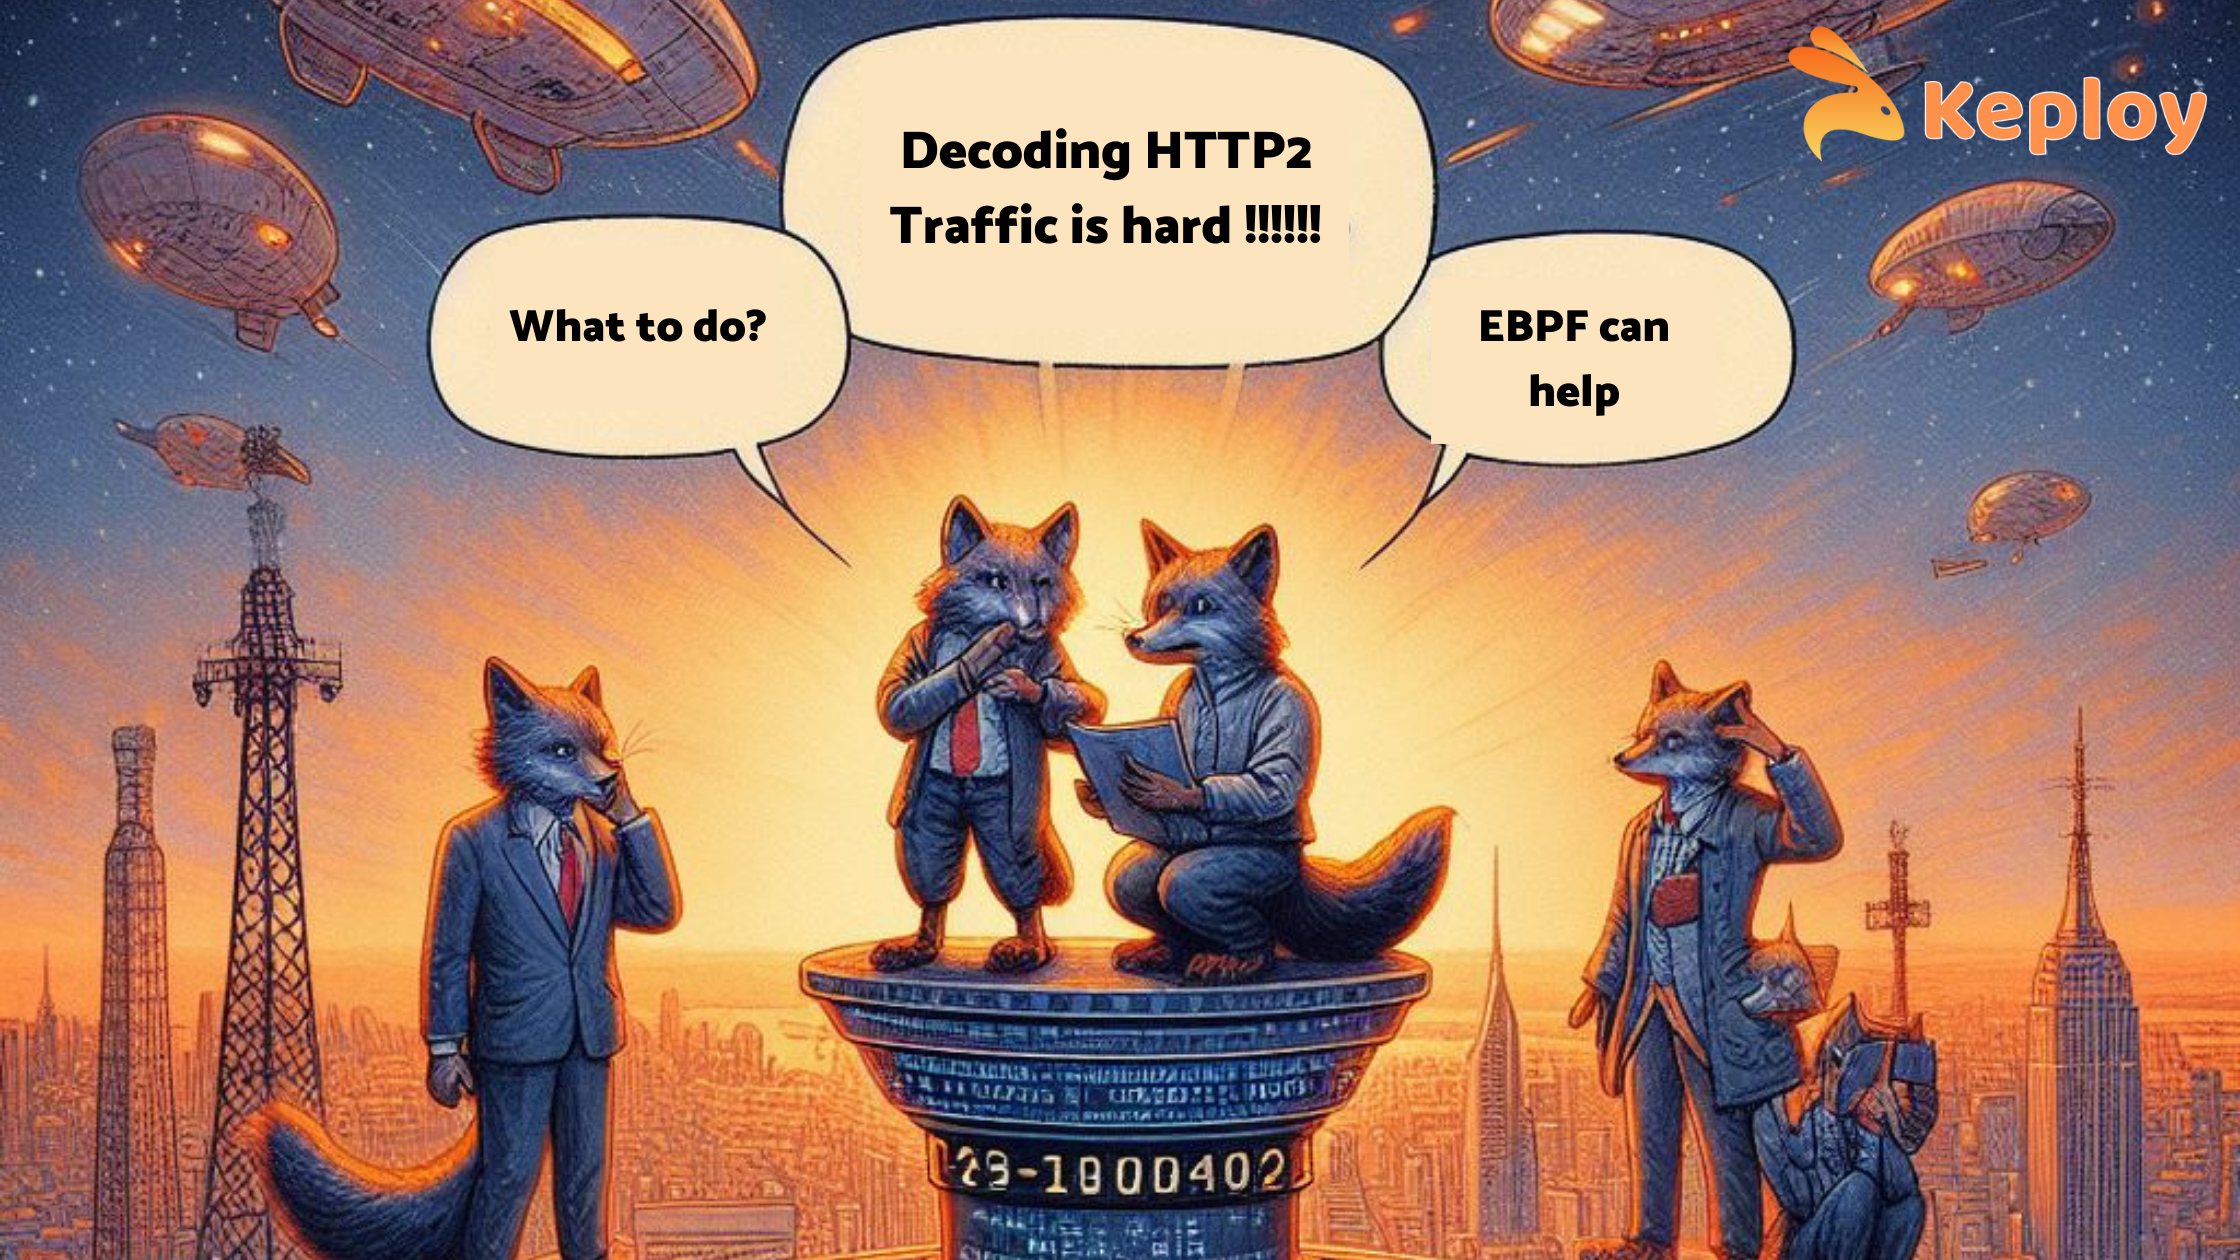 Cover Image for Decoding HTTP/2 Traffic is Hard, but eBPF can help